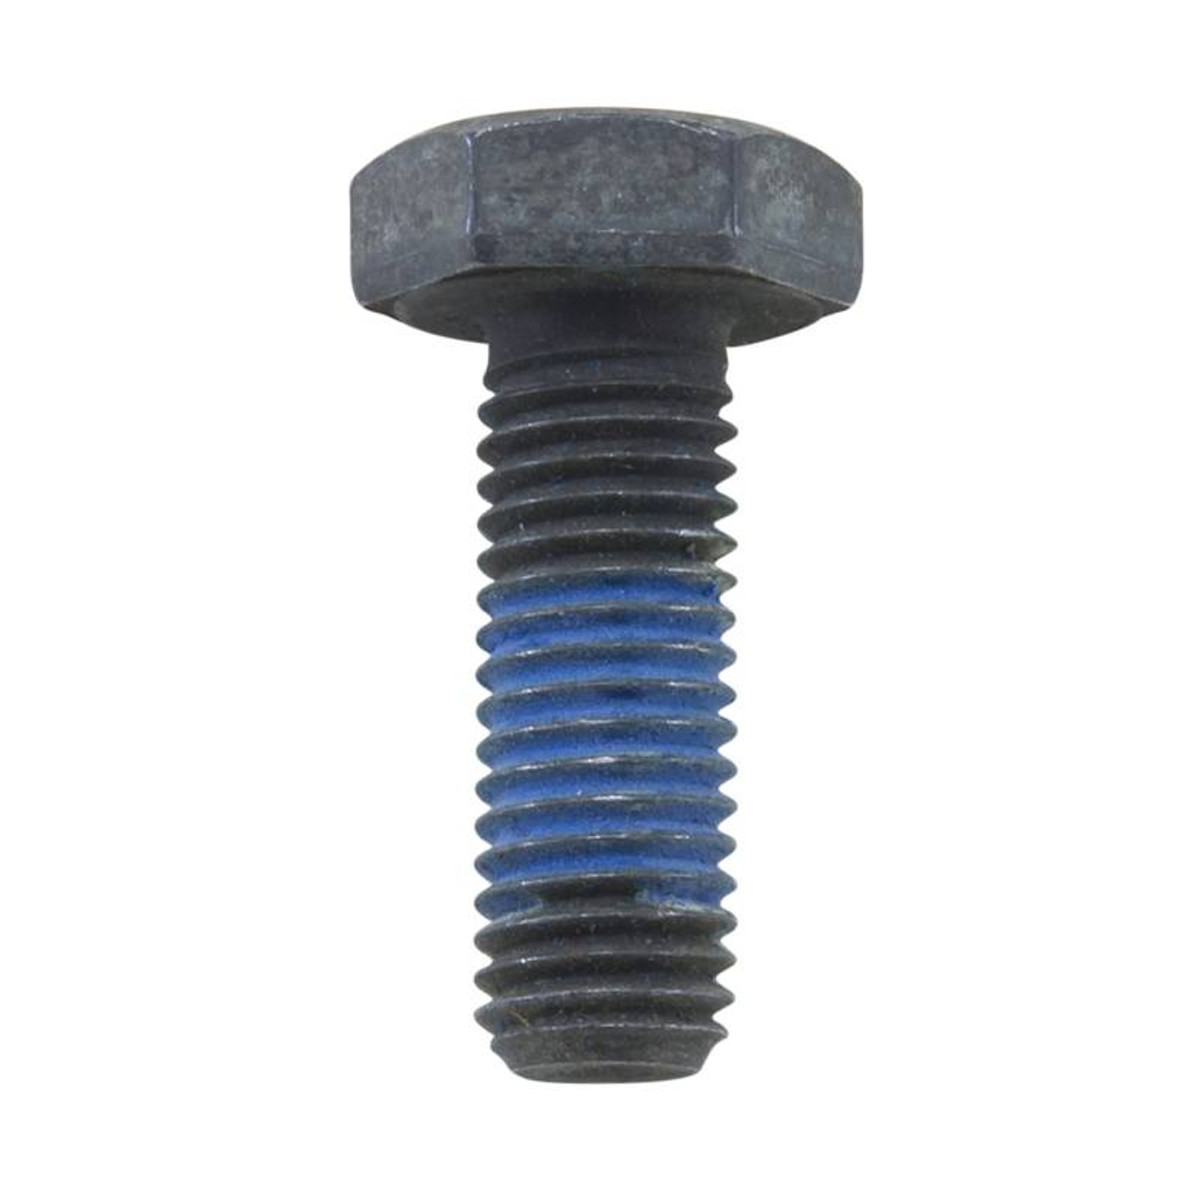 Replacement Ring Gear Bolt For Dana S110 15/16 Inch Head YSPBLT-043